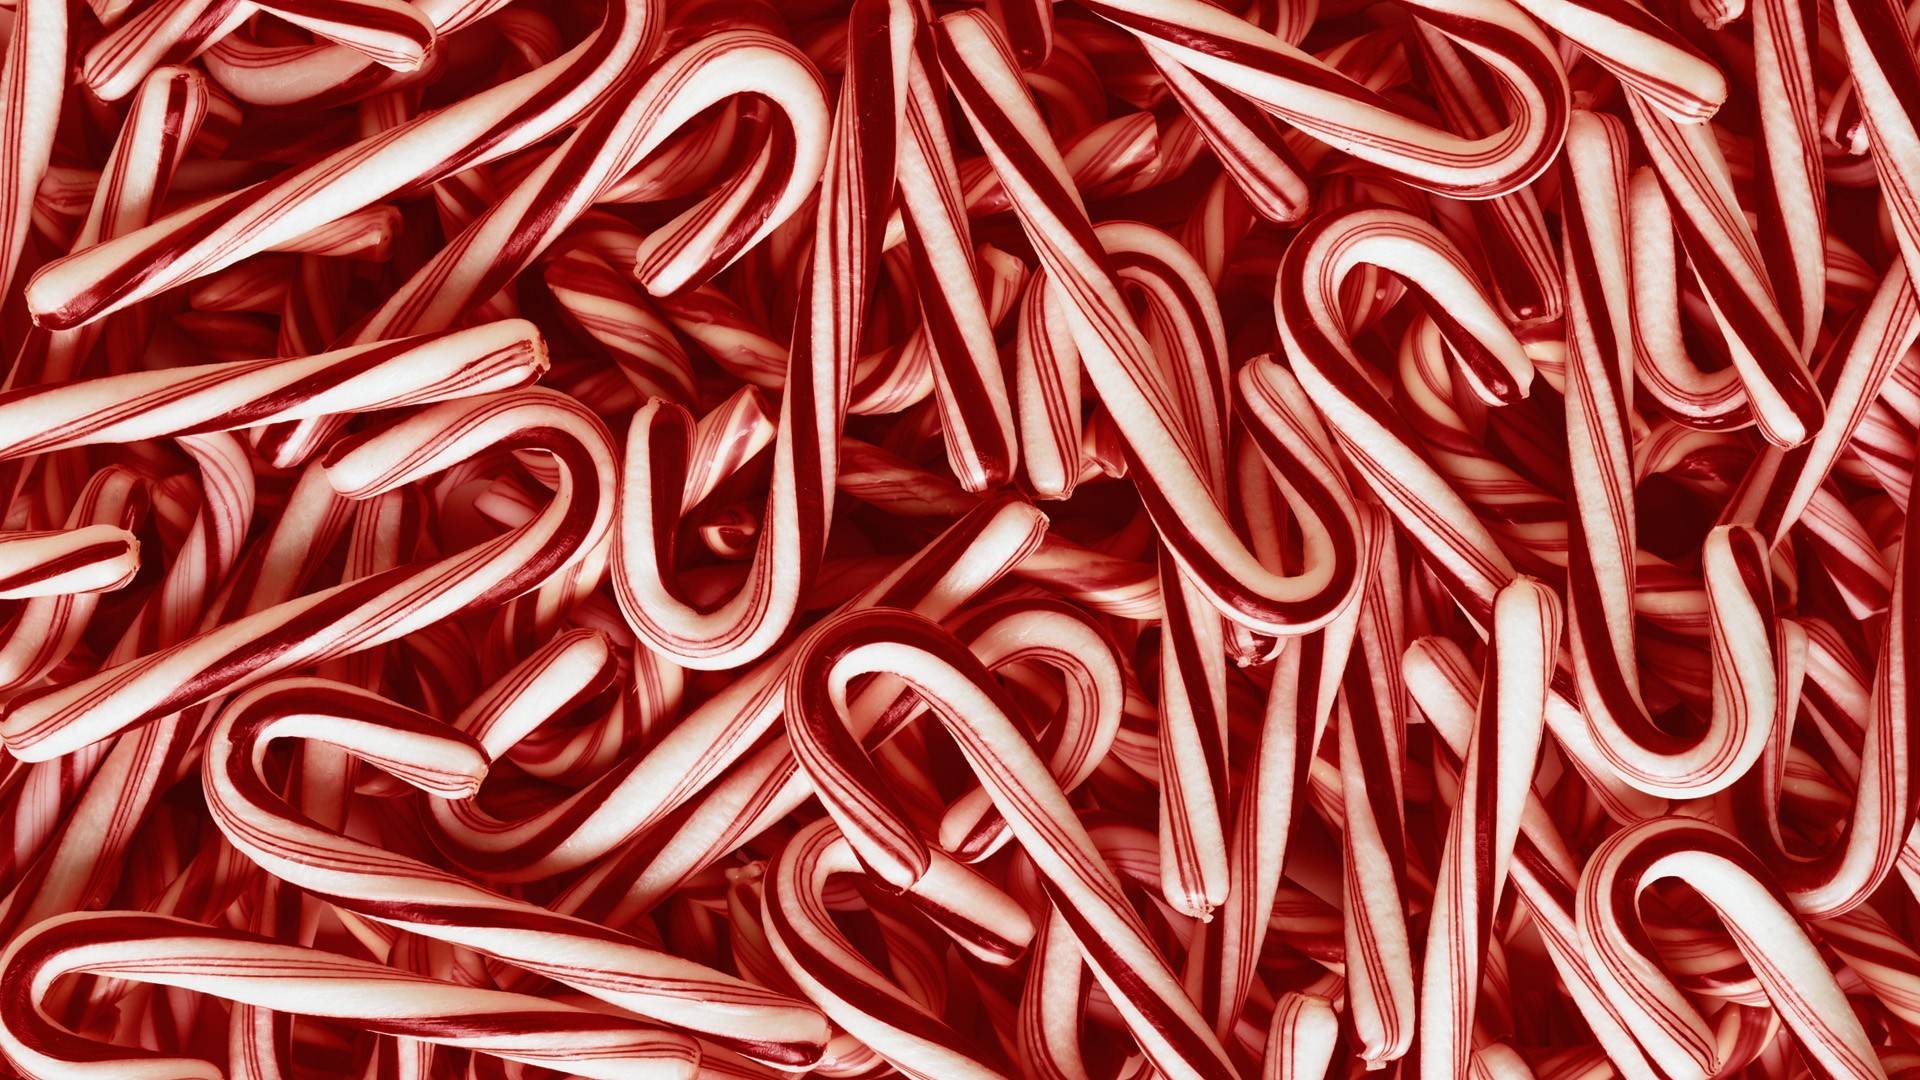 Candy Canes 1920×1080 Wallpaper 1666040